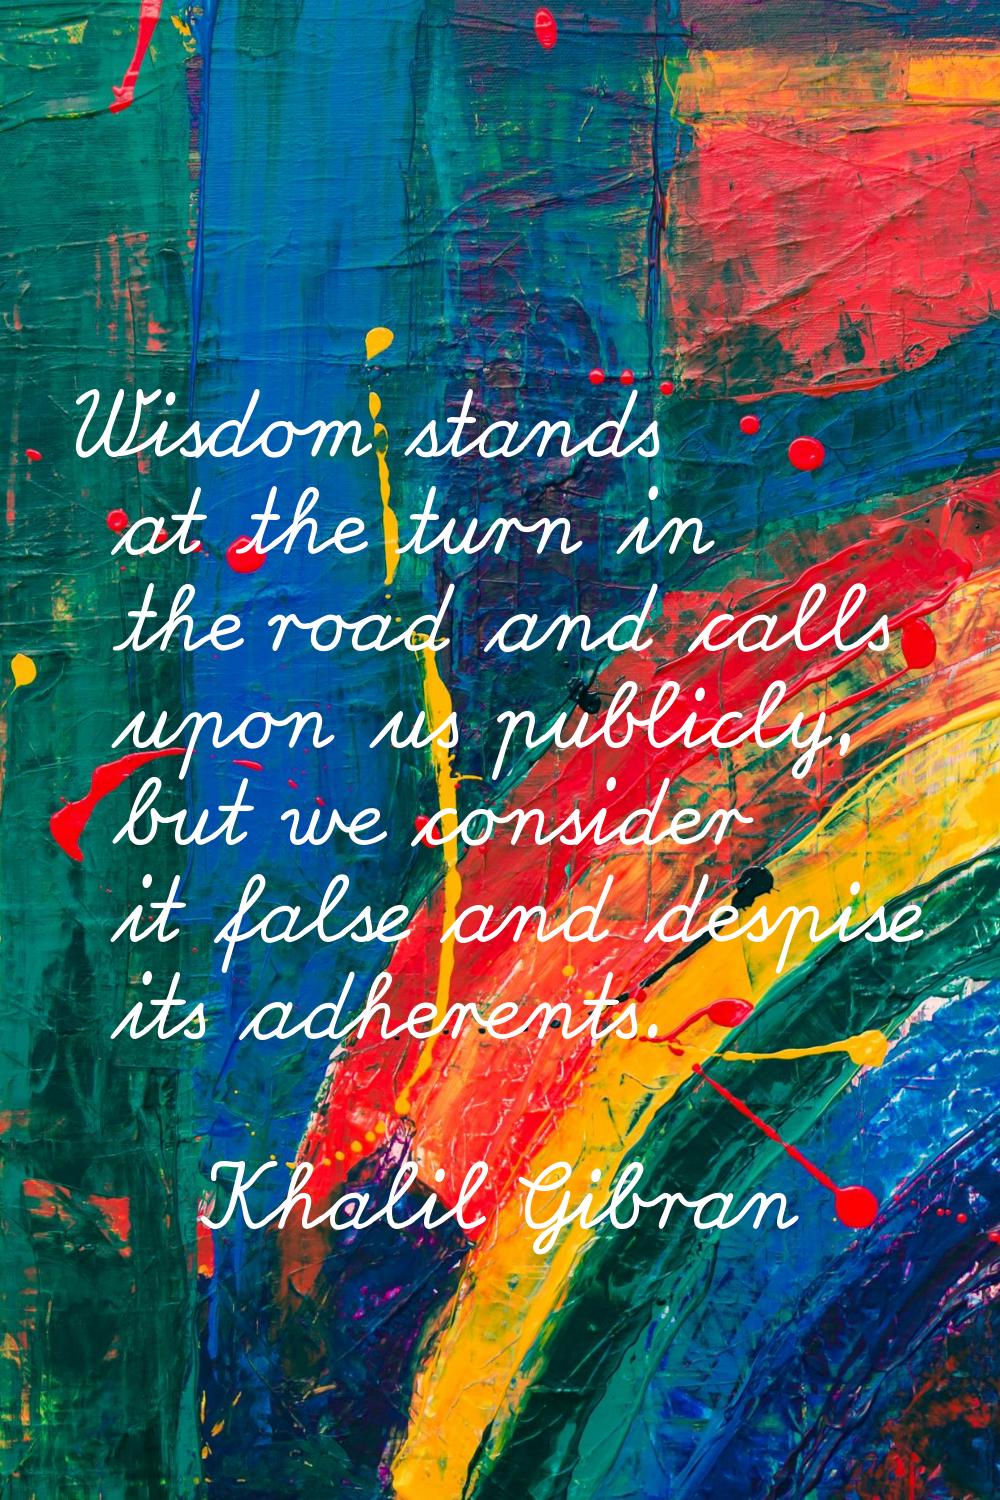 Wisdom stands at the turn in the road and calls upon us publicly, but we consider it false and desp